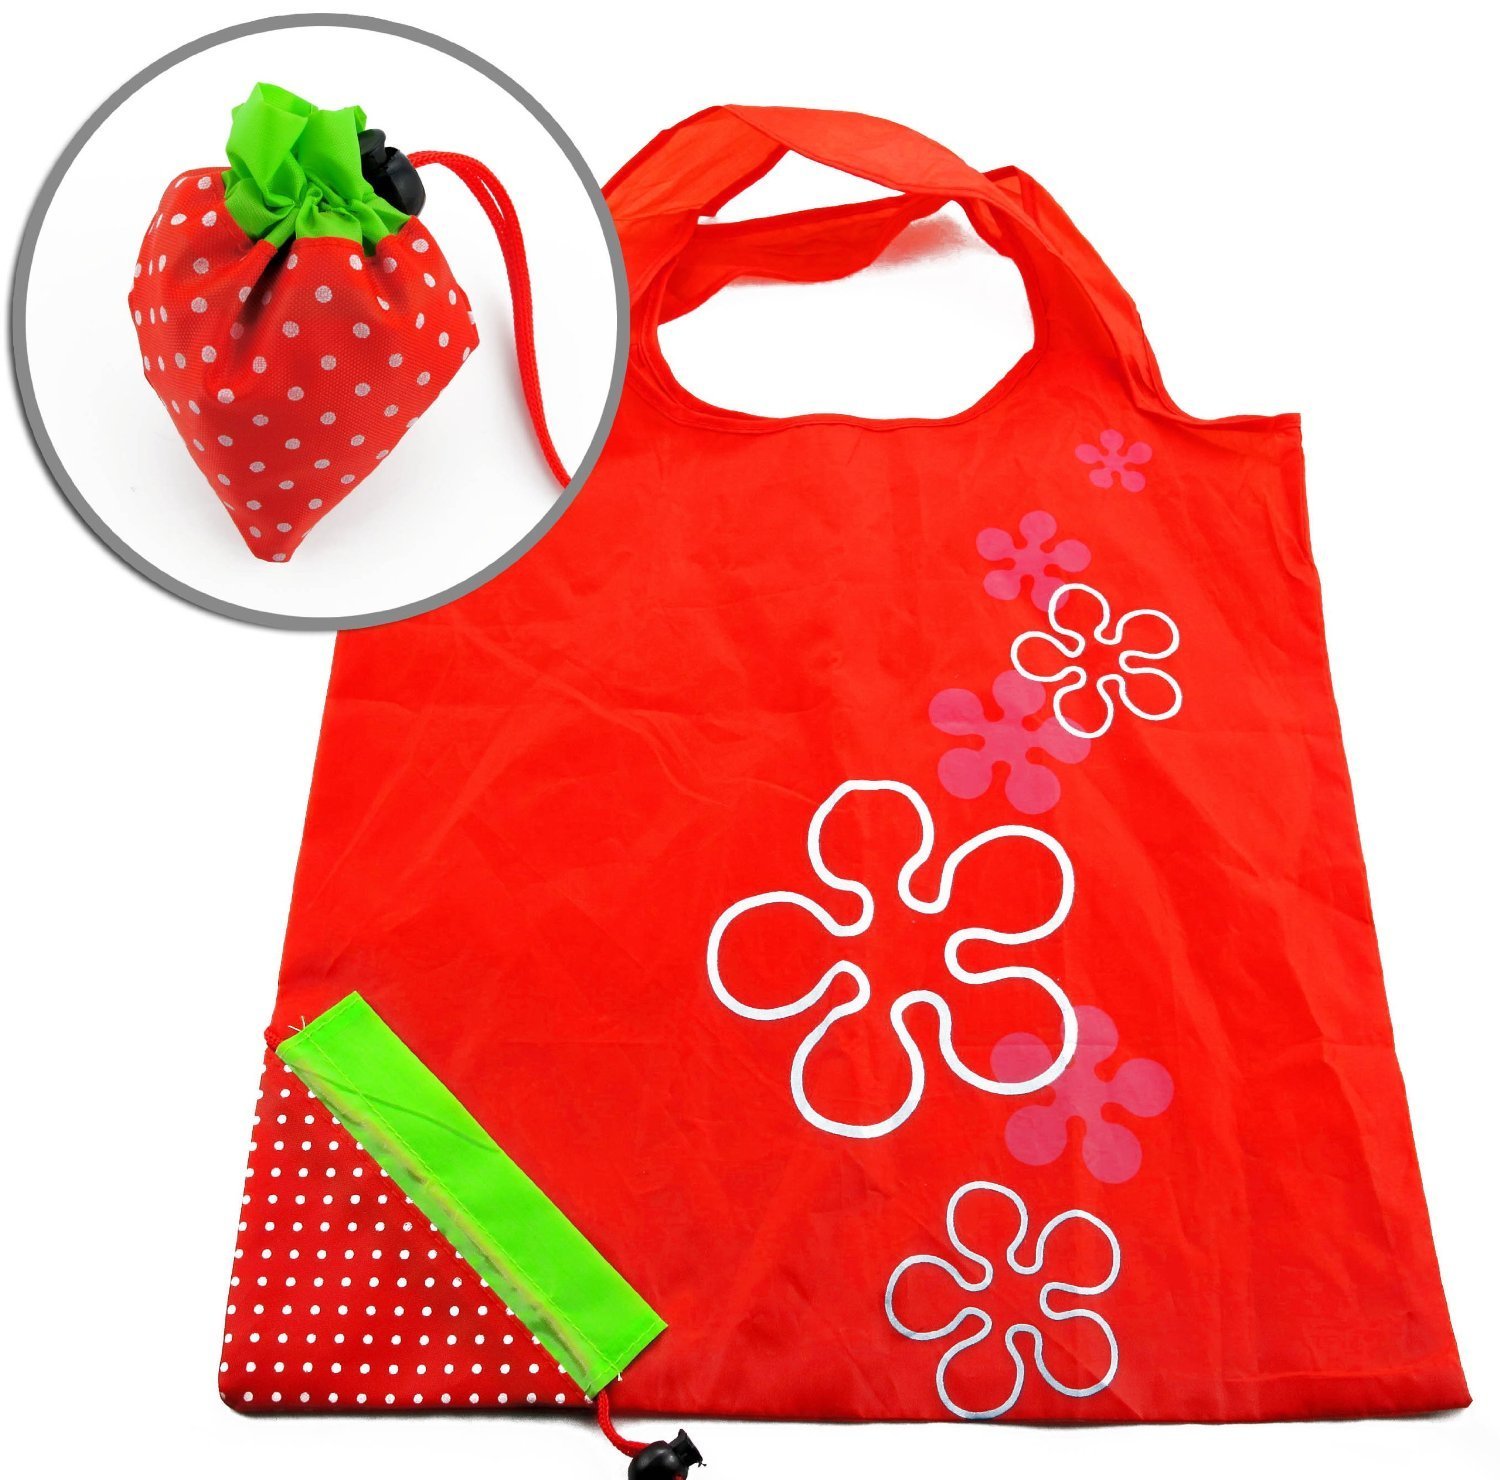 Foldable Compact Strawberry Reusable Shopping Bag—$1.66 shipped! (Or LESS)